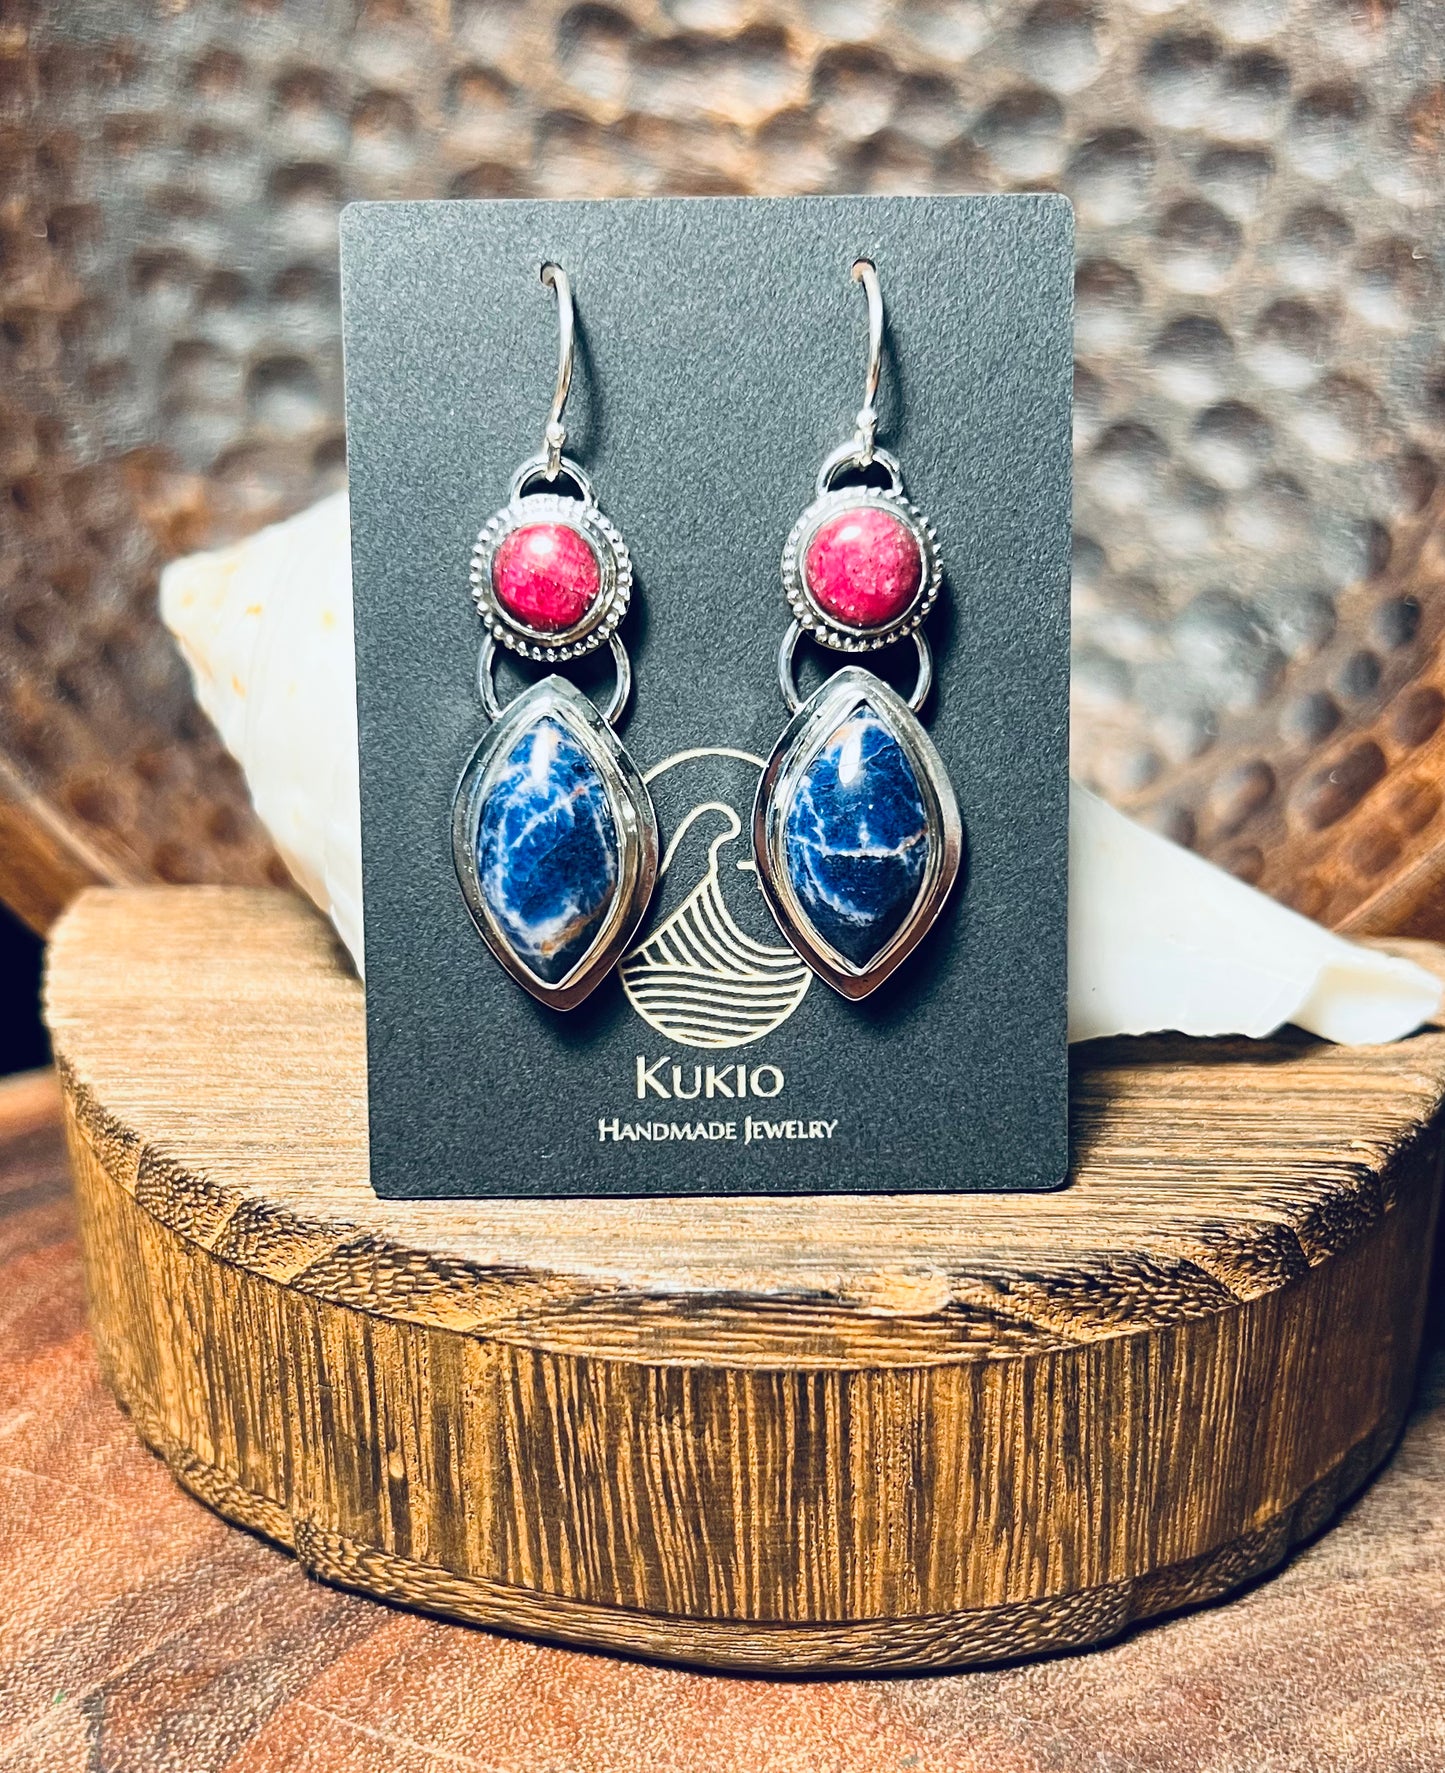 Sodalite and Ruby Sterling Silver Earrings